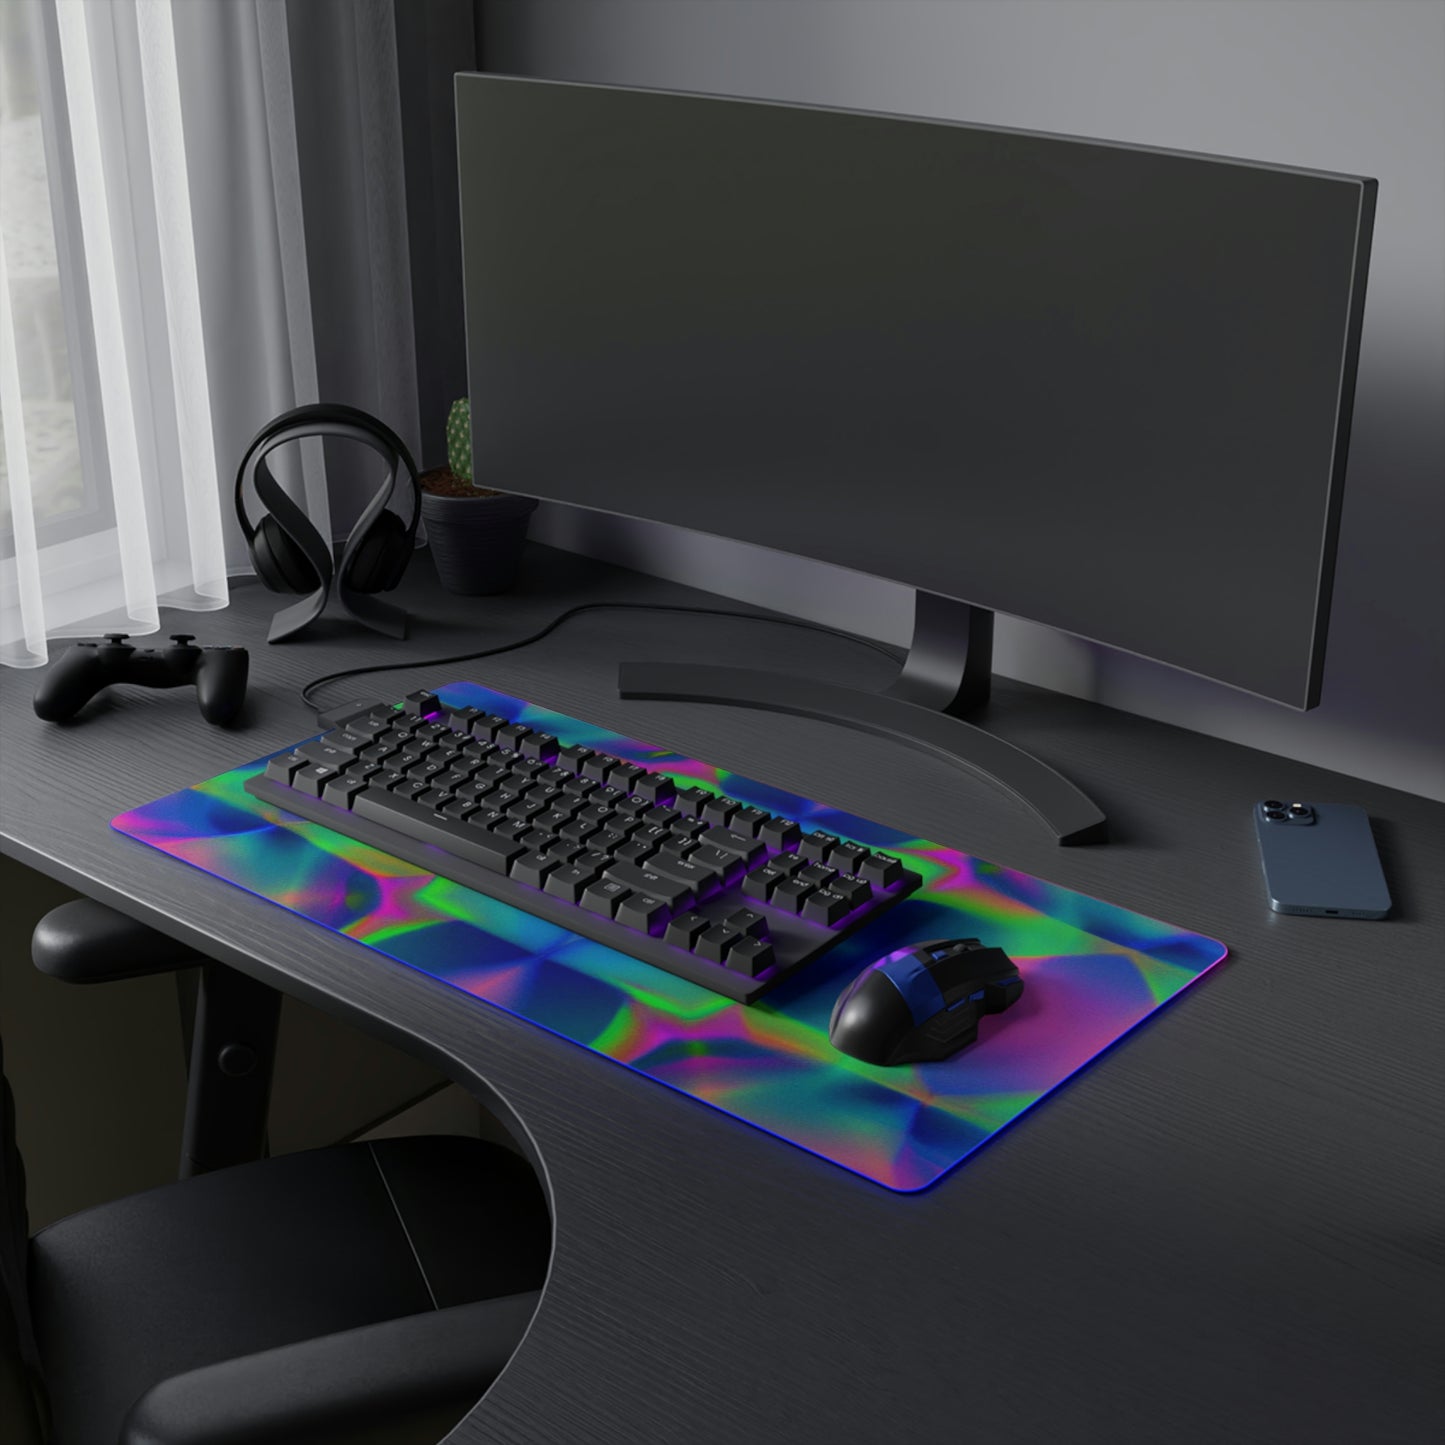 Thea Rockabelly - Psychedelic Trippy LED Light Up Gaming Mouse Pad